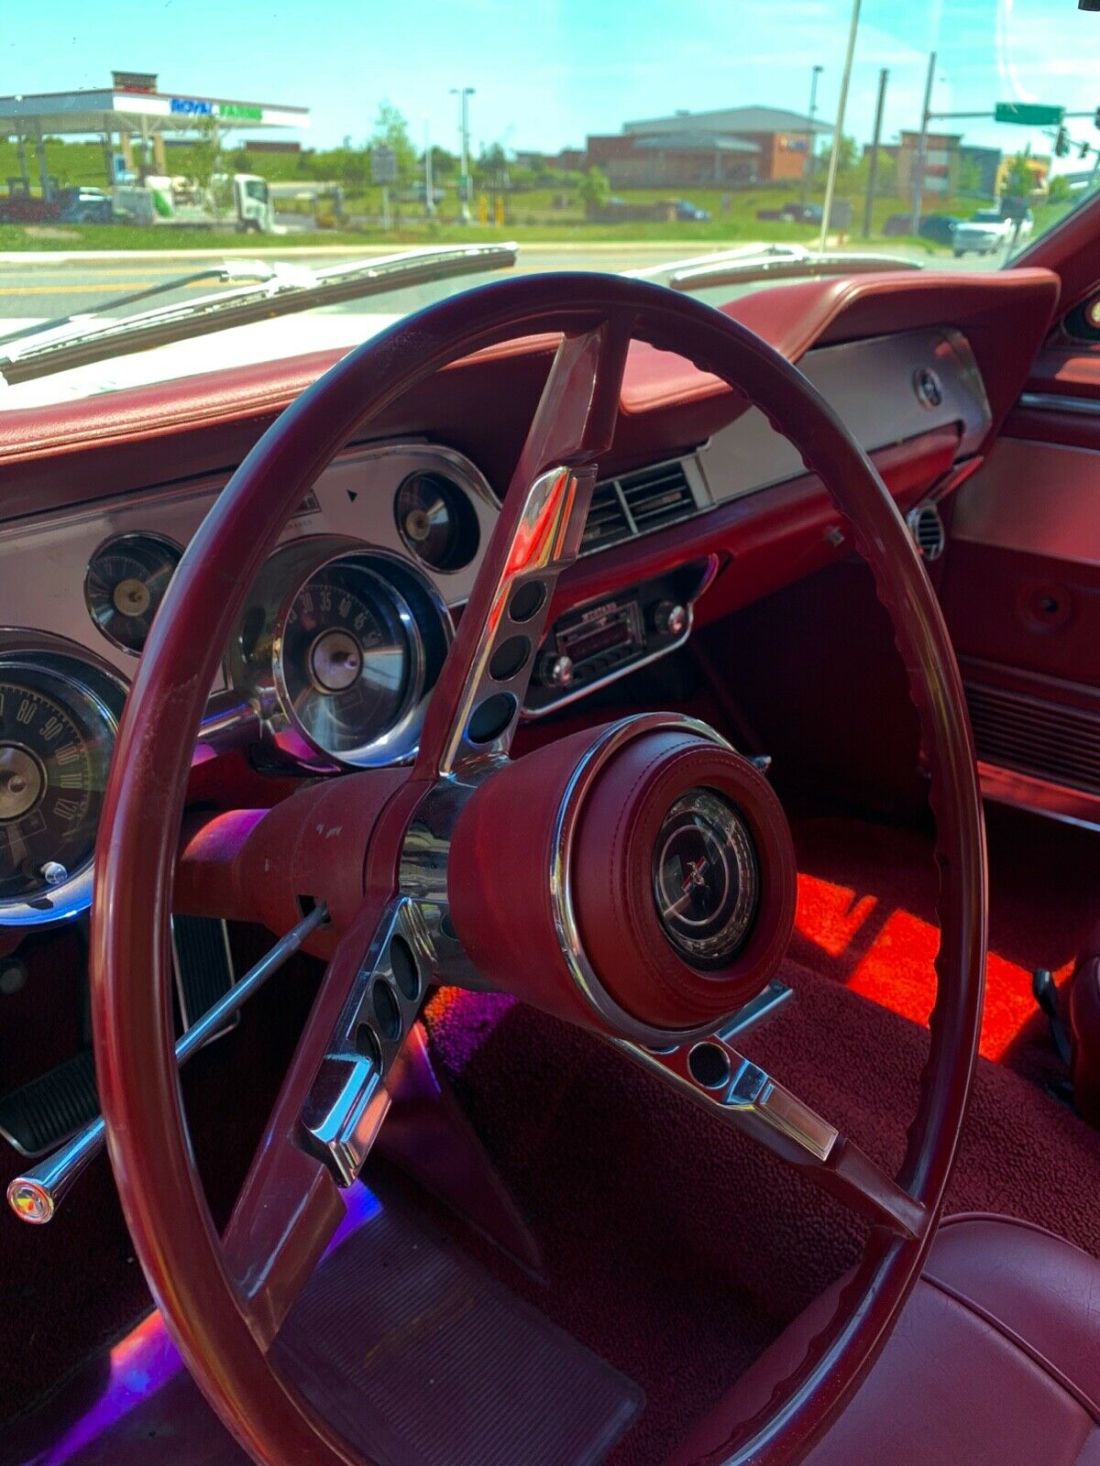 1967 Ford Mustang S Code Deluxe Interior For Sale Ford Mustang 1967